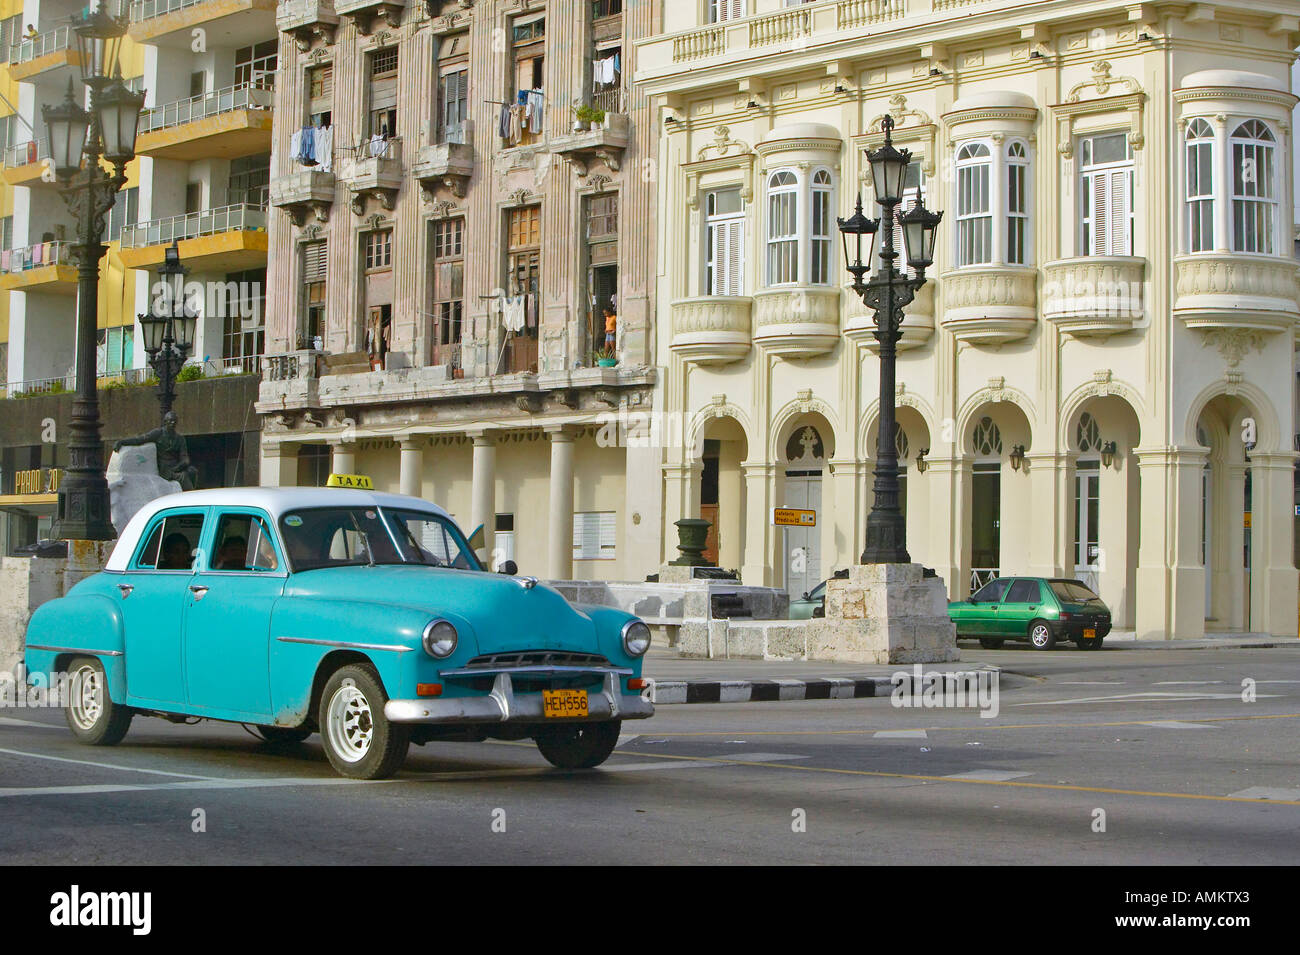 Turquoise taxi driving the streets of Old Havana Cuba Stock Photo